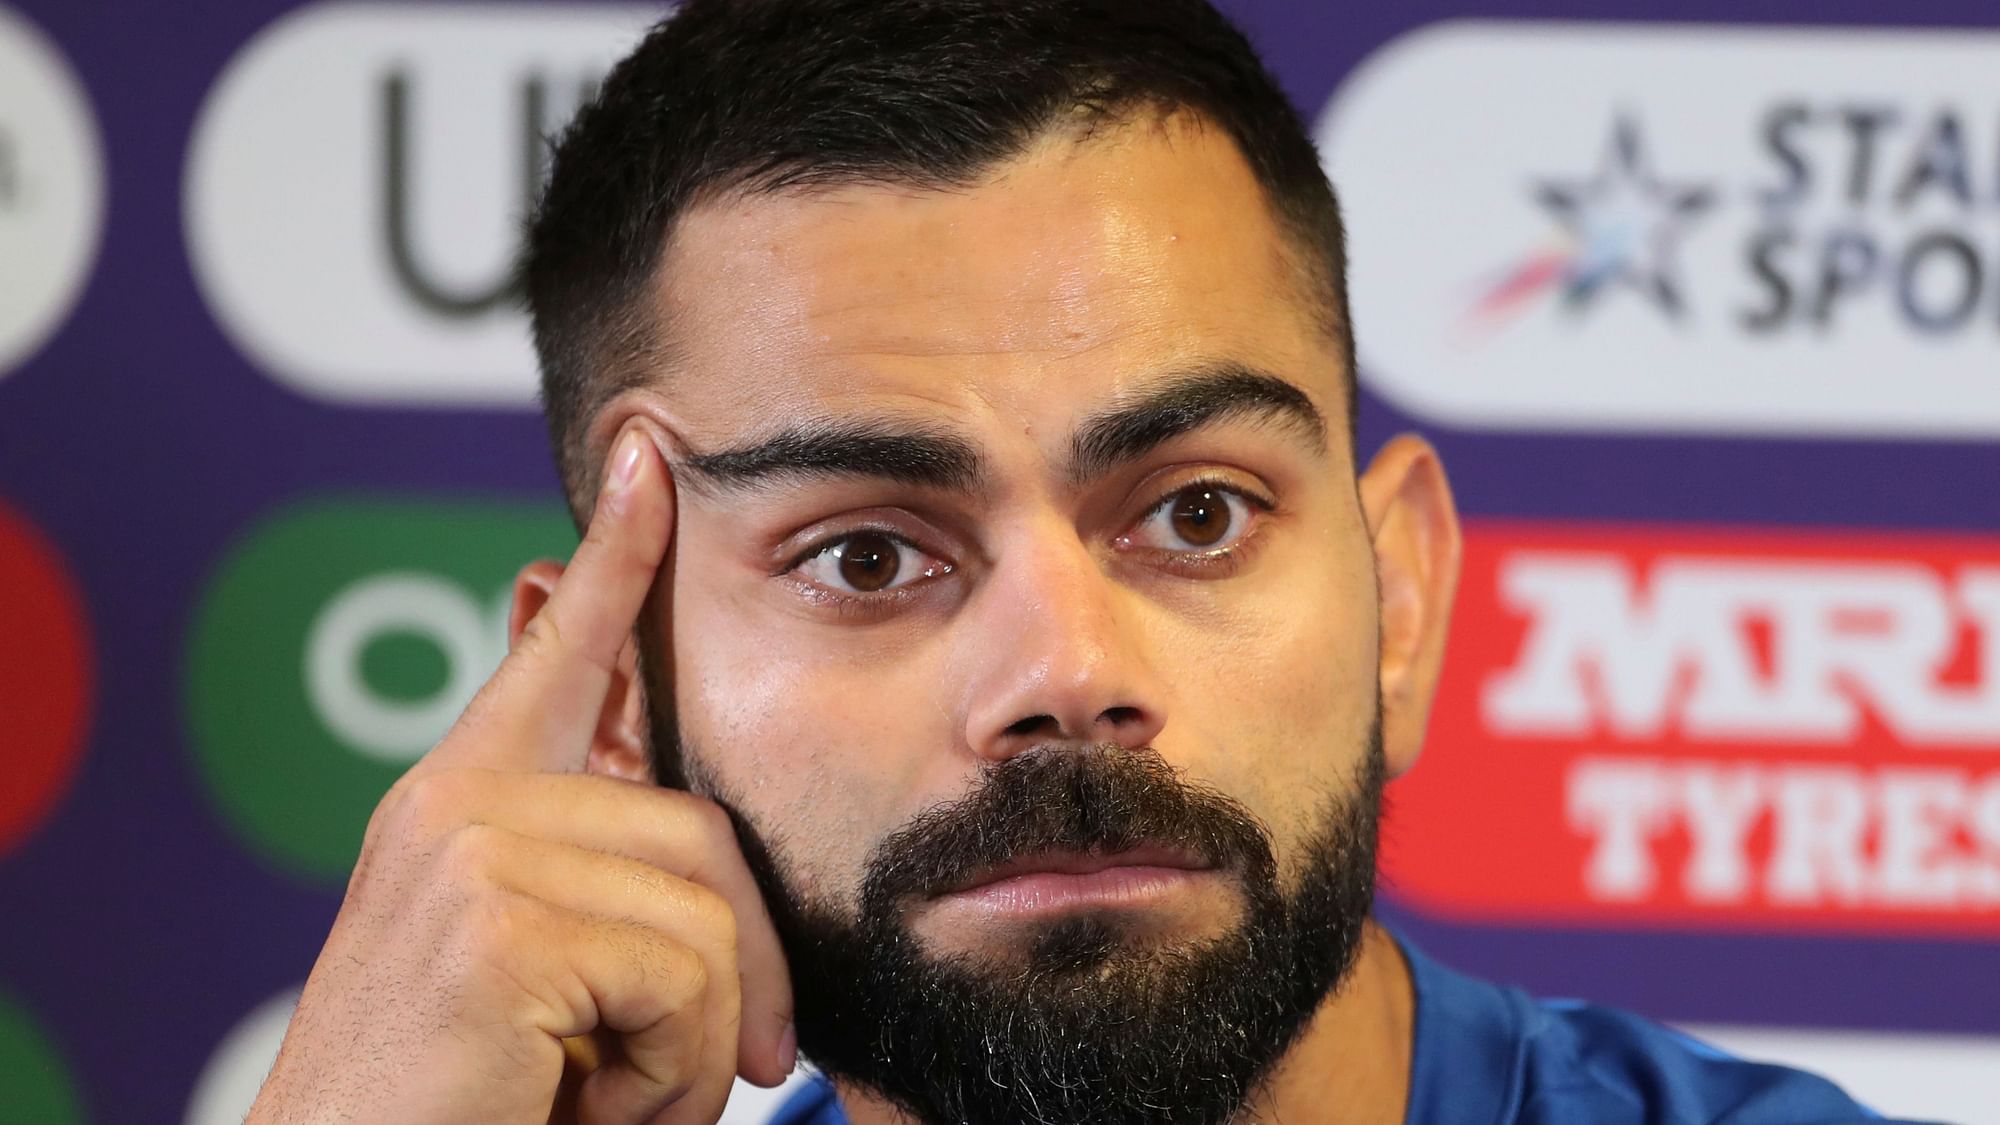 Indian skipper Virat Kohli talked about India’s batting, MS Dhoni’s innings at the end and the toss, after India’s loss to England on Sunday.